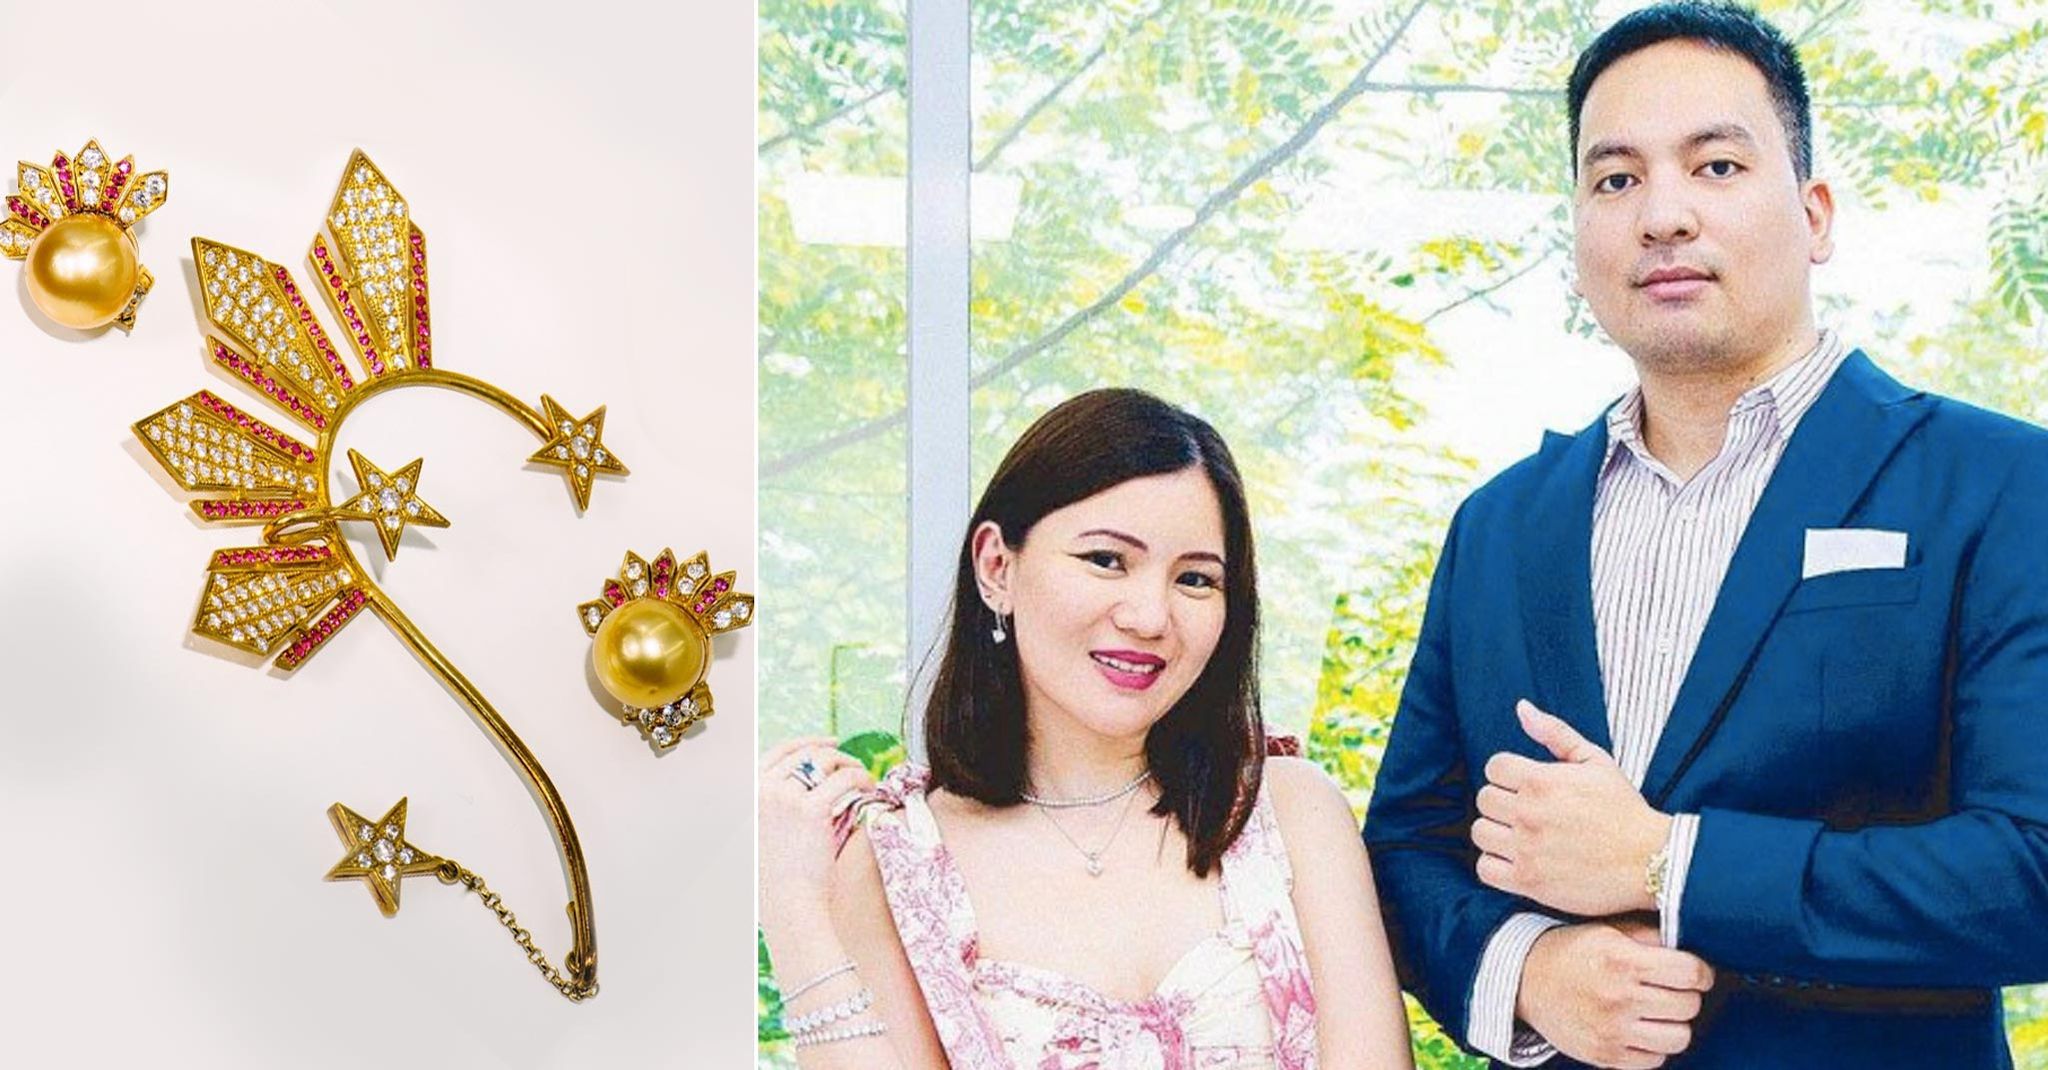 Jewelry company behind Catriona Gray’s iconic Miss Universe ear cuff  turns 10